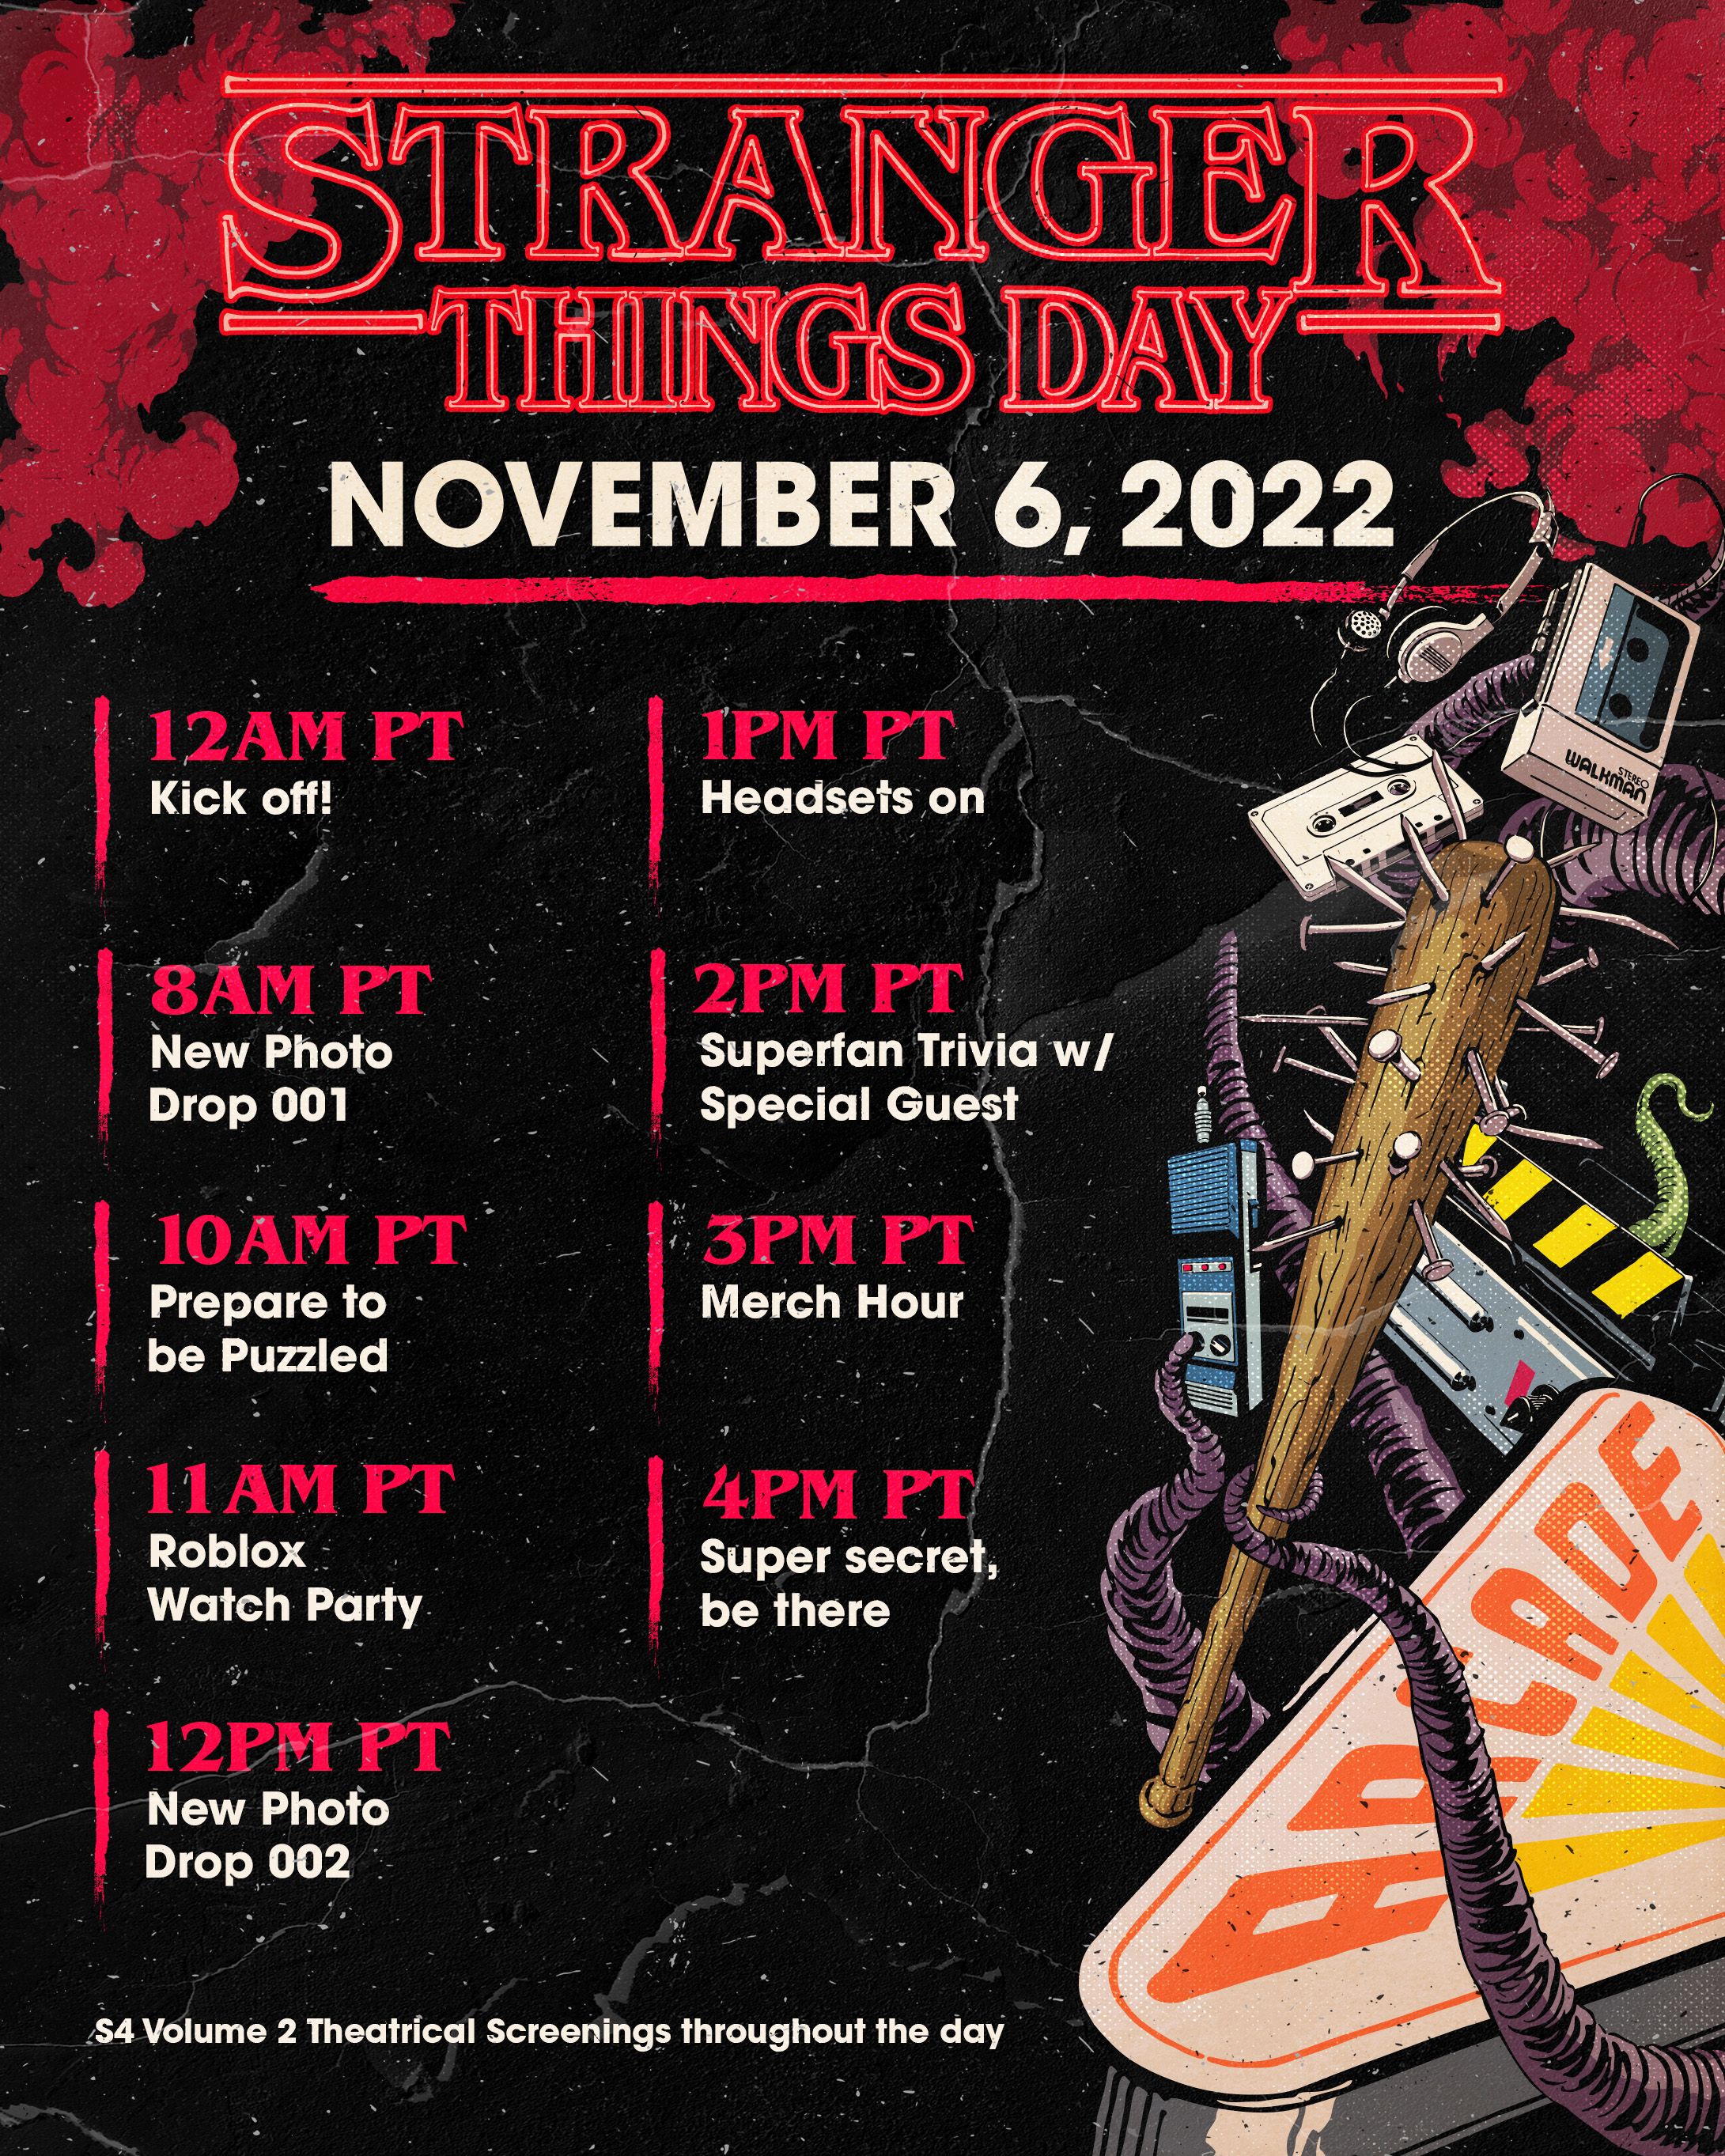 Stranger Things Day Celebration Includes Theatrical Screenings, Super